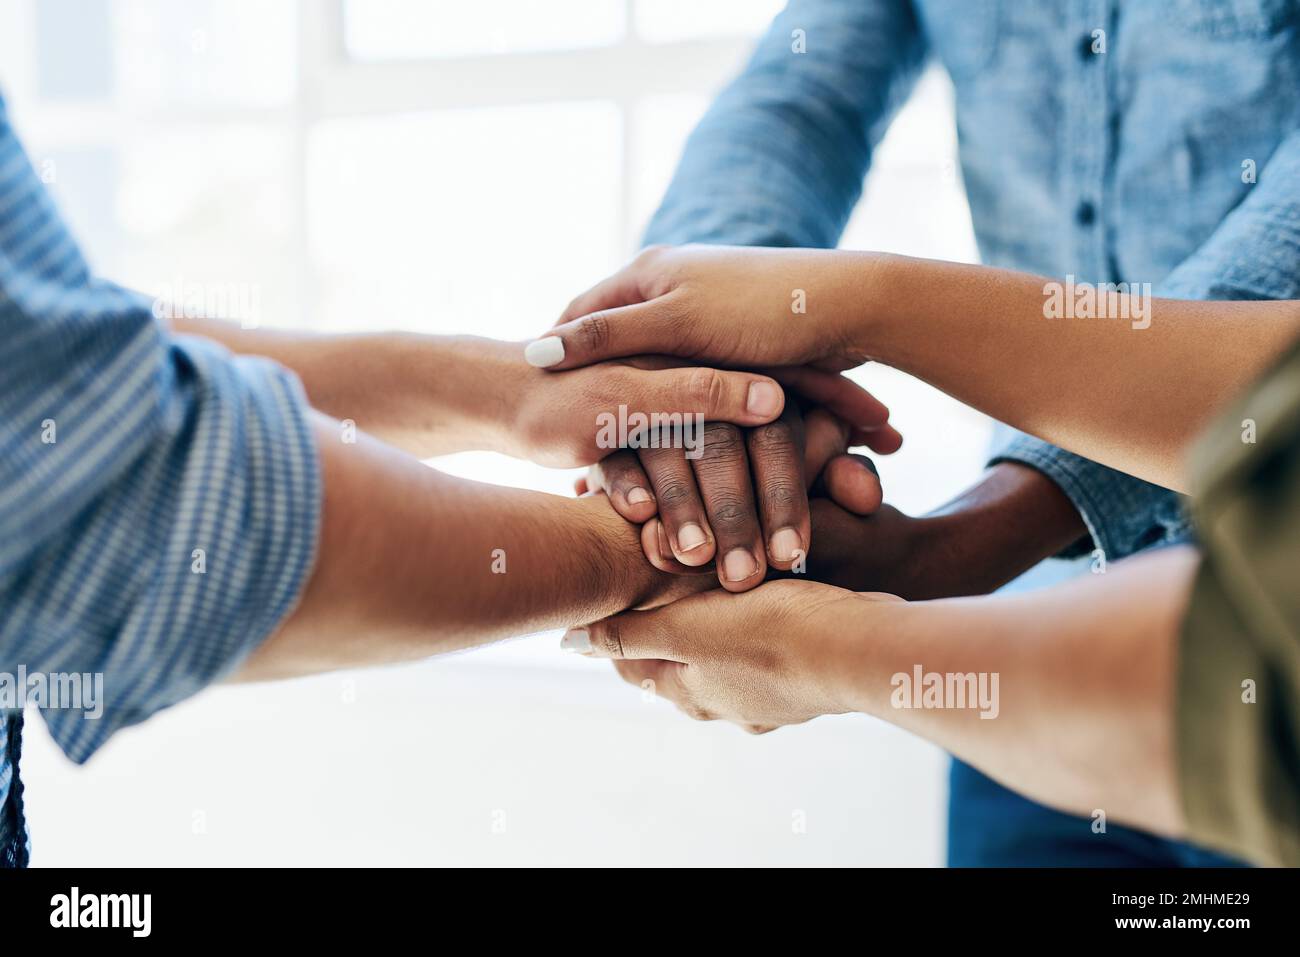 Working together as one unit. a work group joining hands in solidarity. Stock Photo